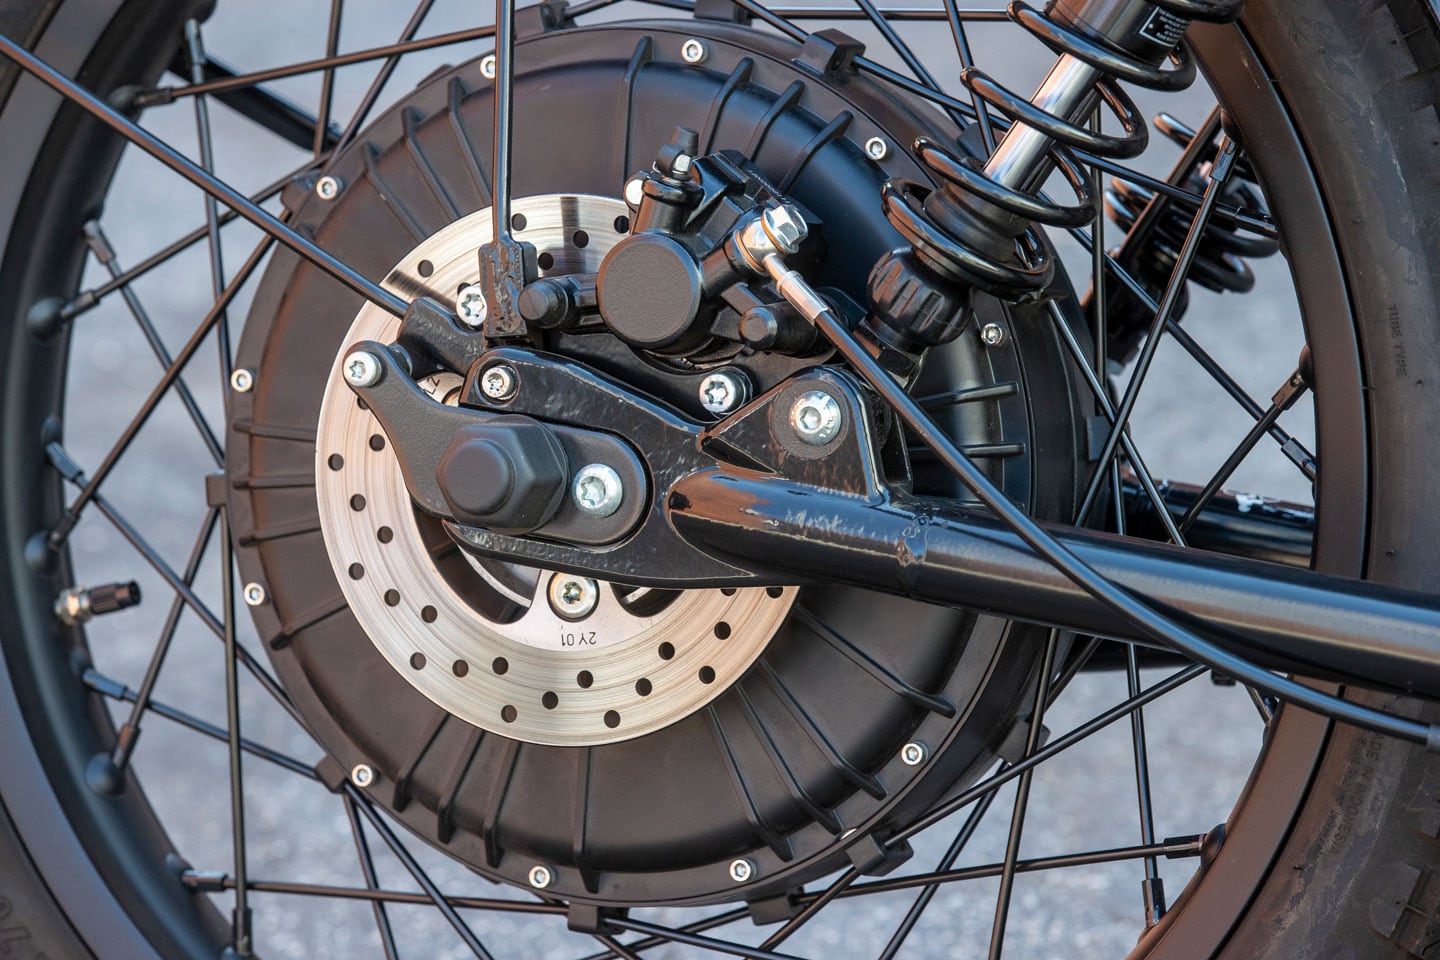 The RM1S is powered by a rear hub-mounted motor providing 7.0kW continuous power and 11.1kW peak power. An advantage of this system is reduced weight and complexity thanks to the removal of a traditional chain-type drivetrain.